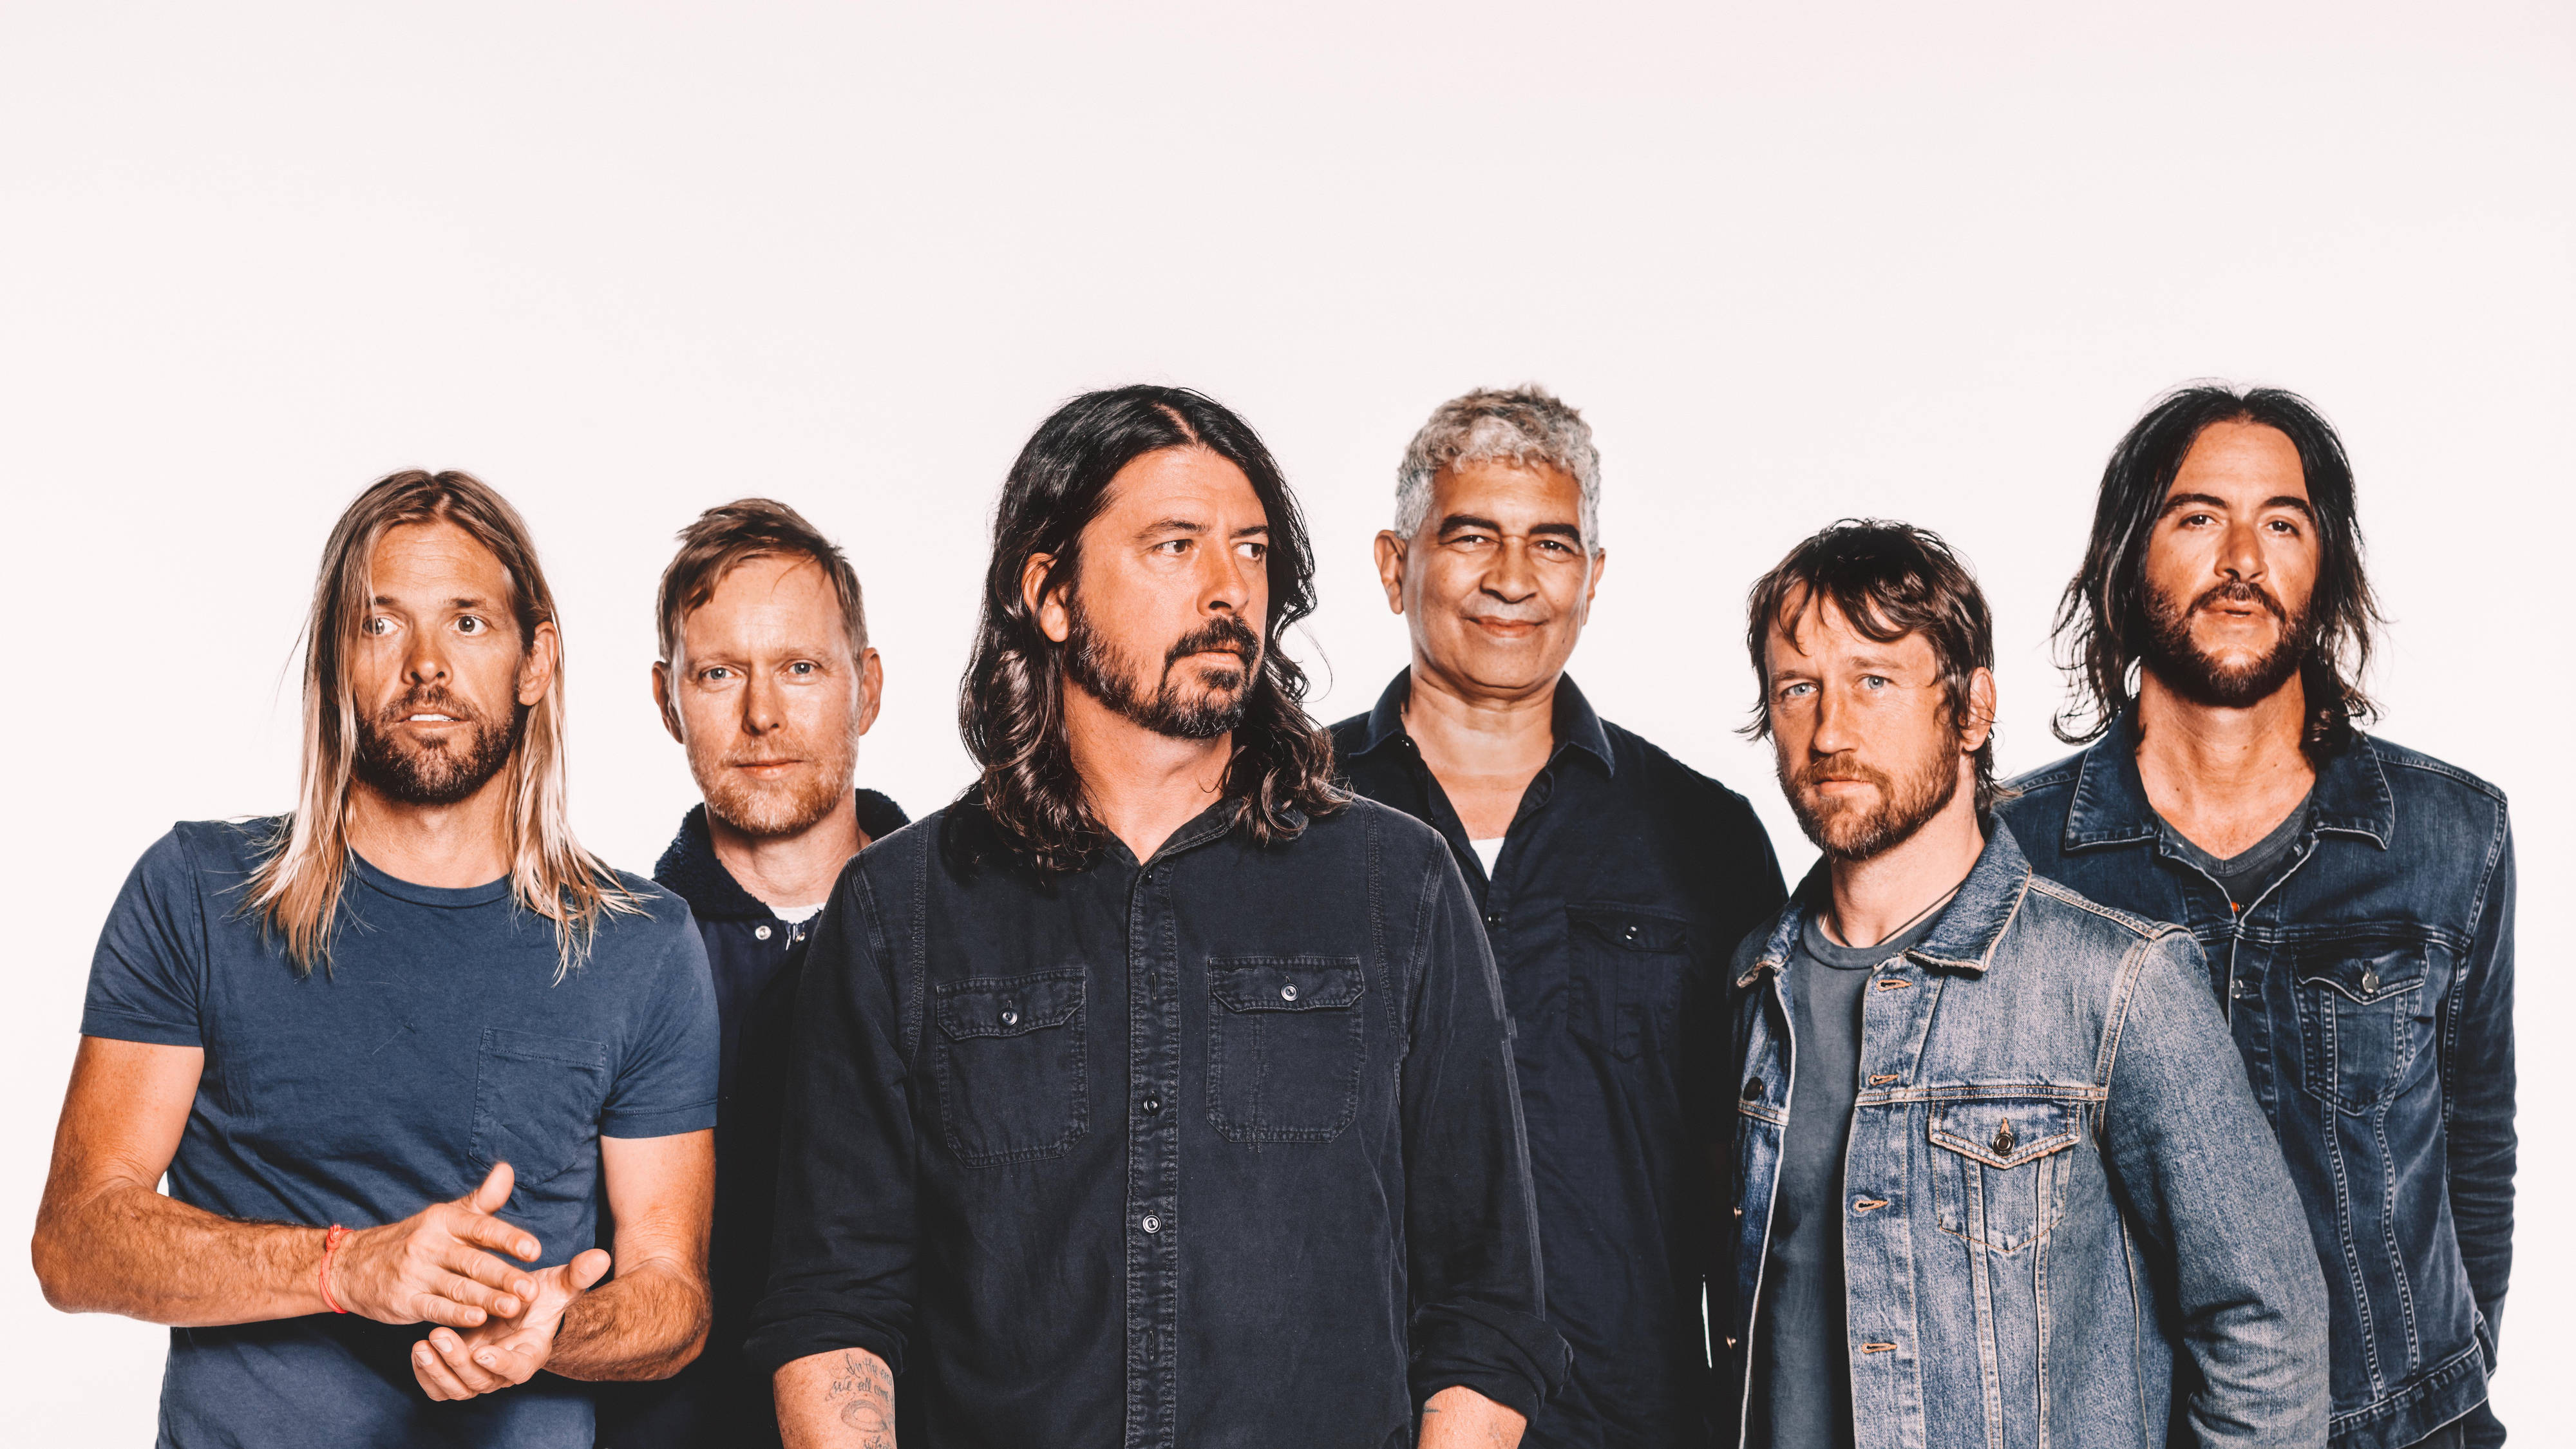 Foo Fighters To Play Shows With Queens of the Stone Age, Mick Jagger At Madison Square Garden